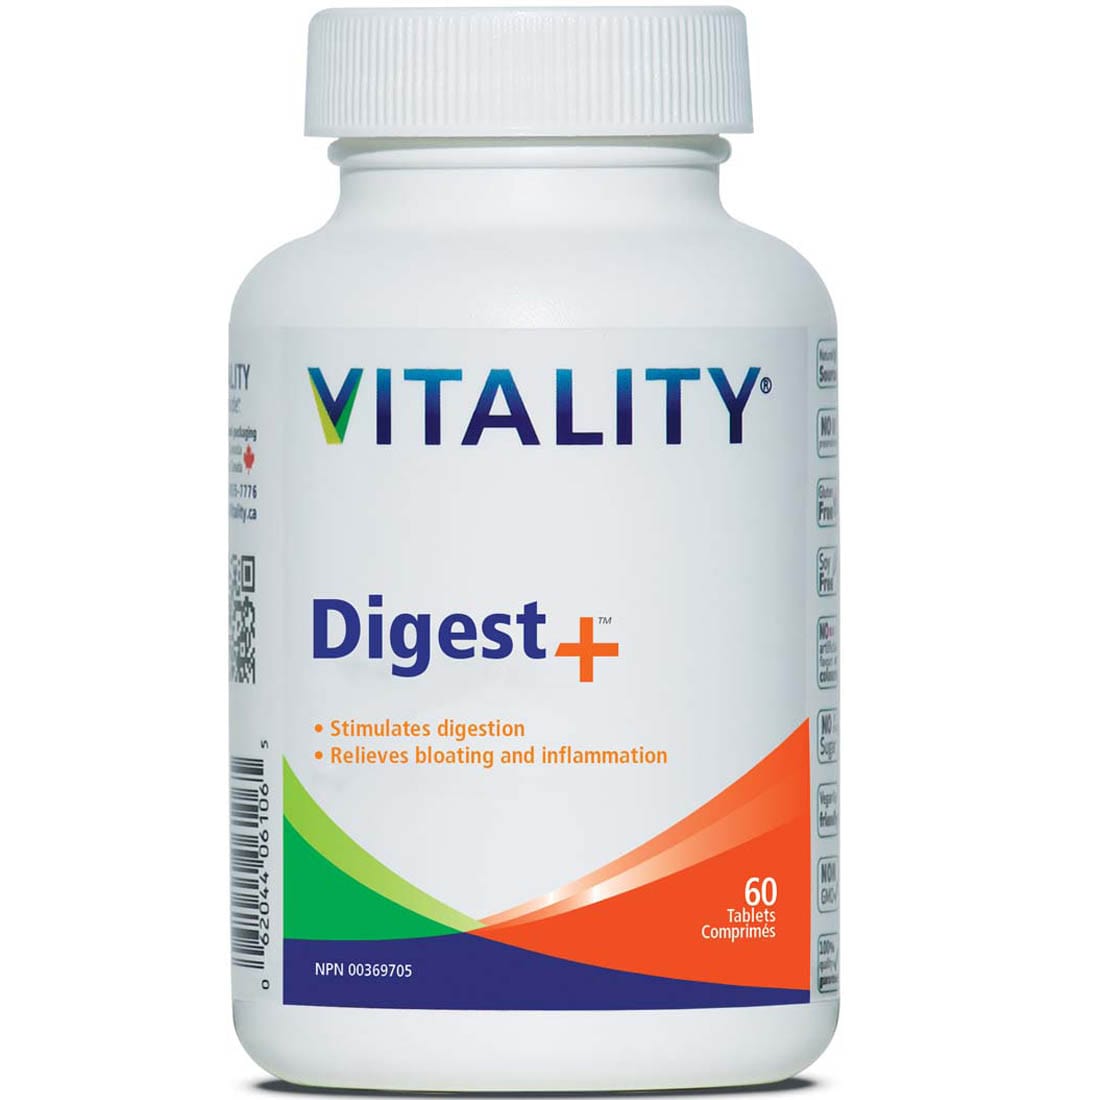 Vitality Digest+, 60 Tablets